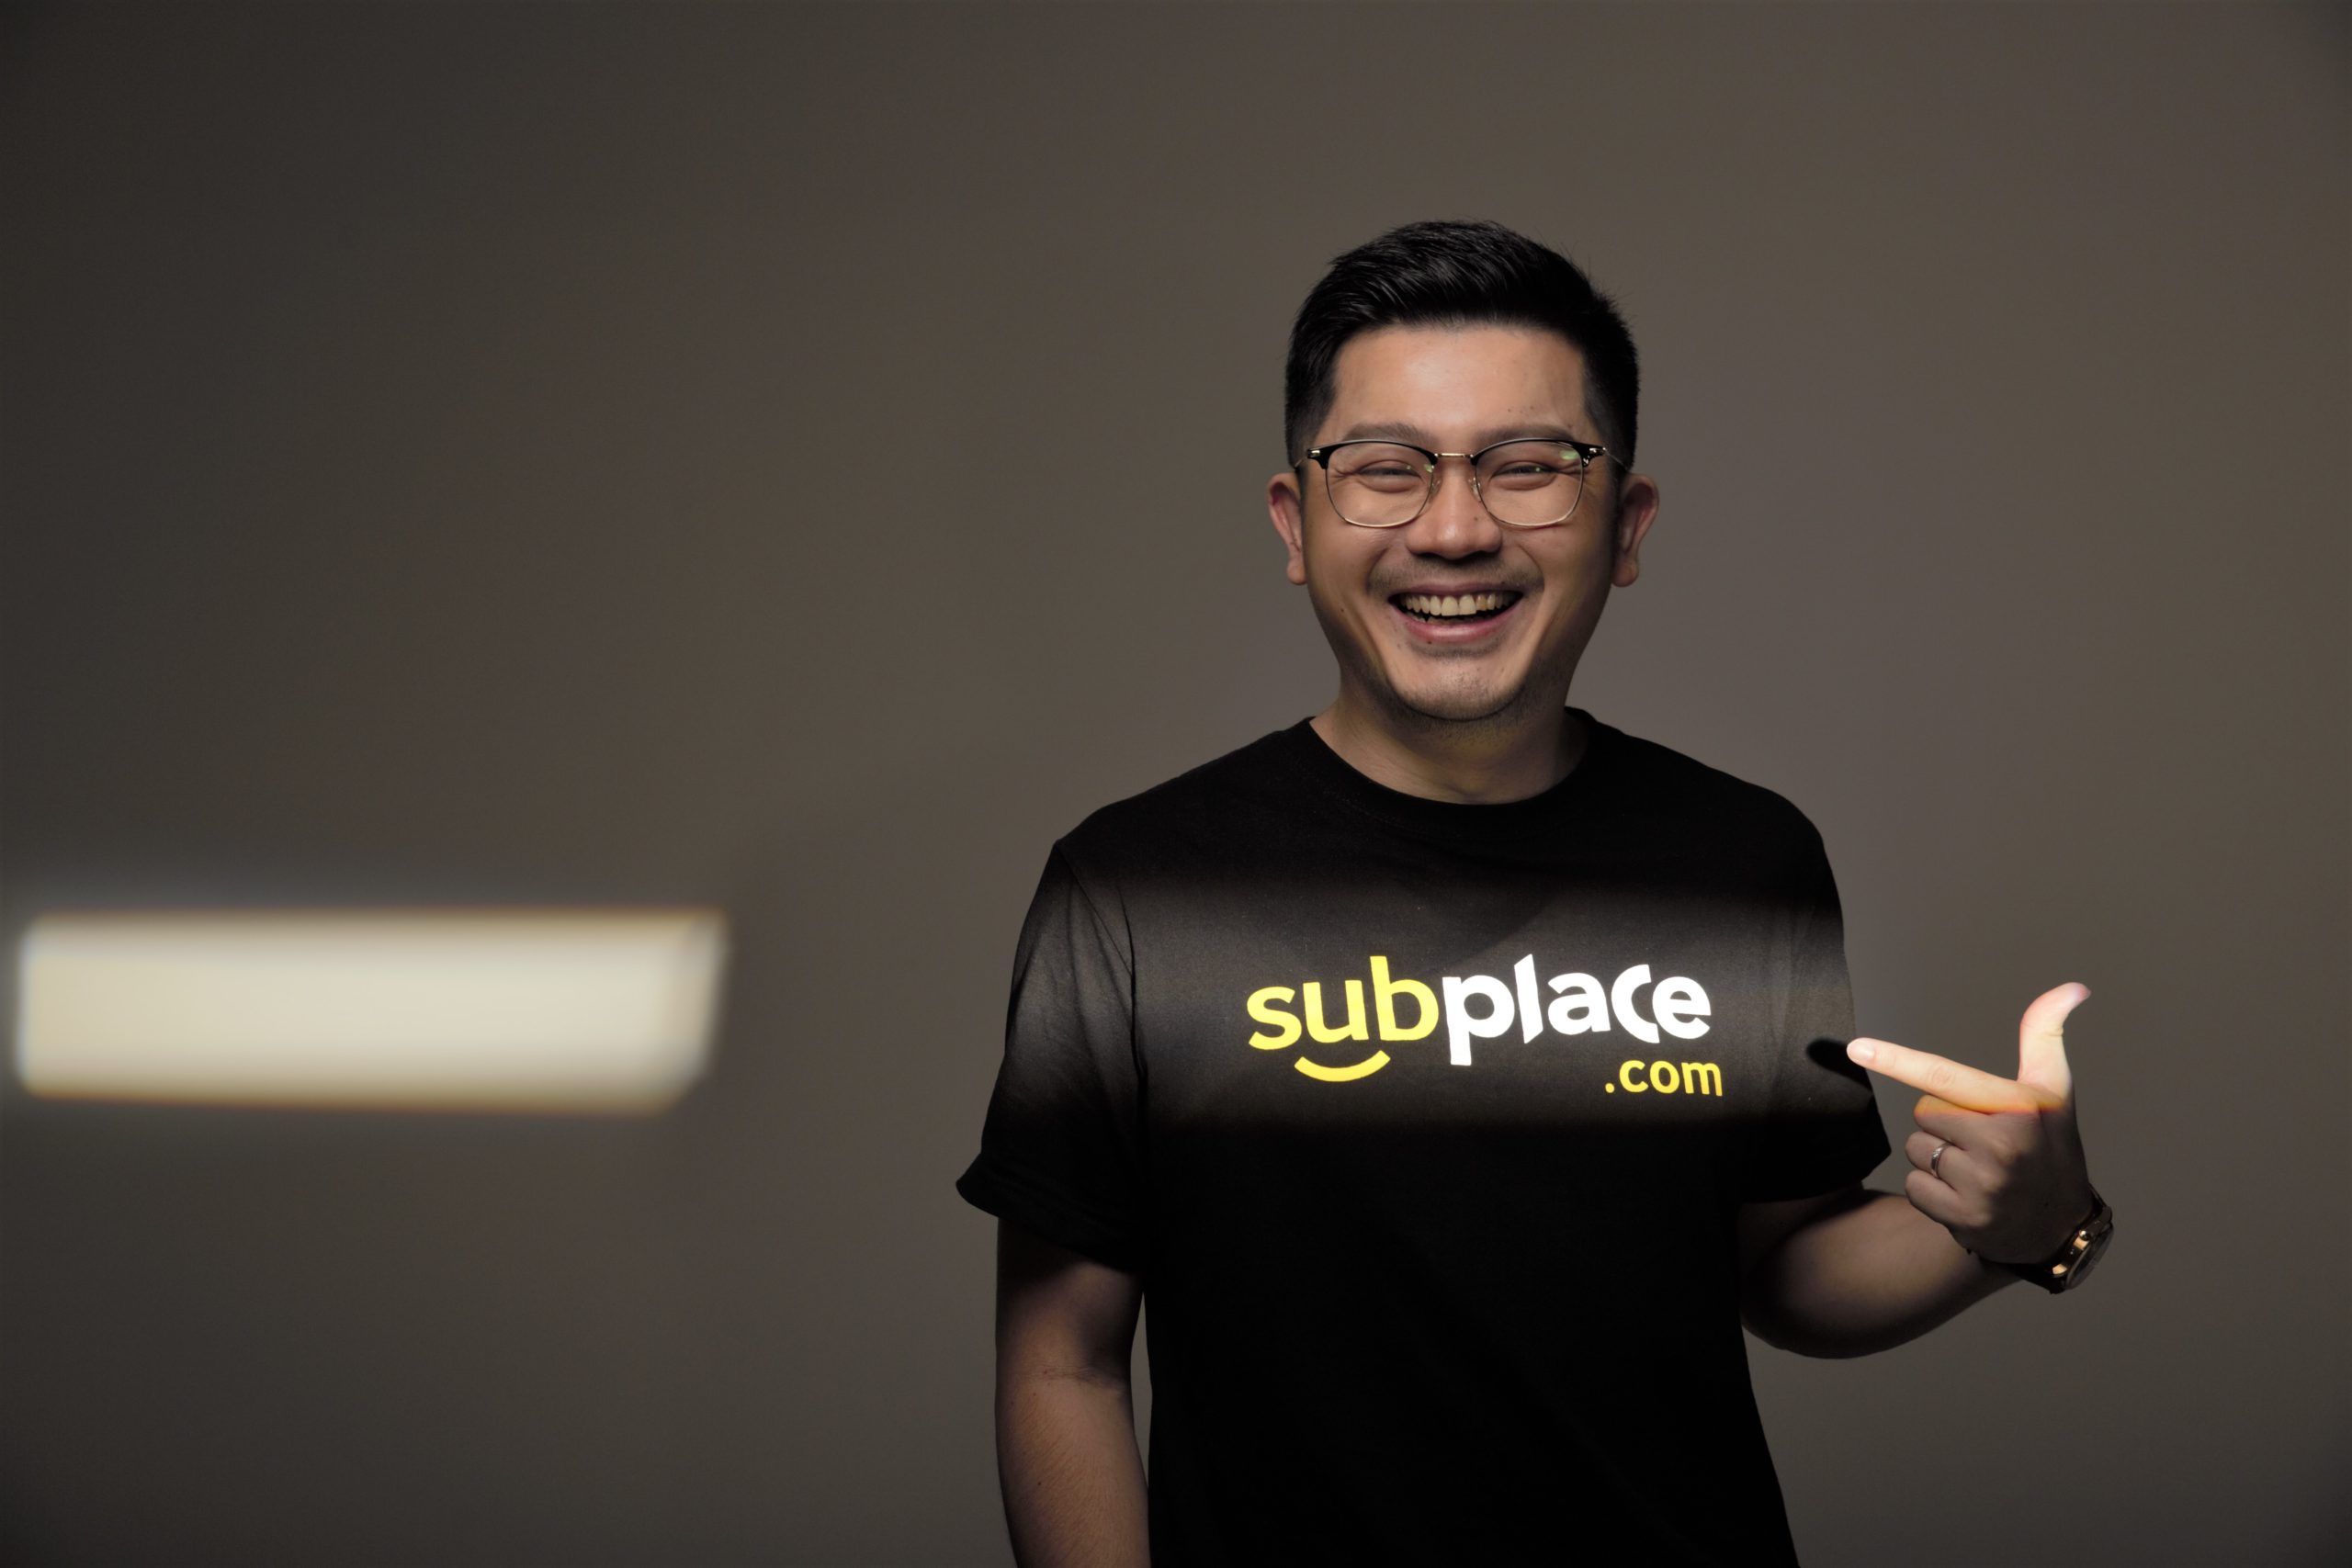 subplace